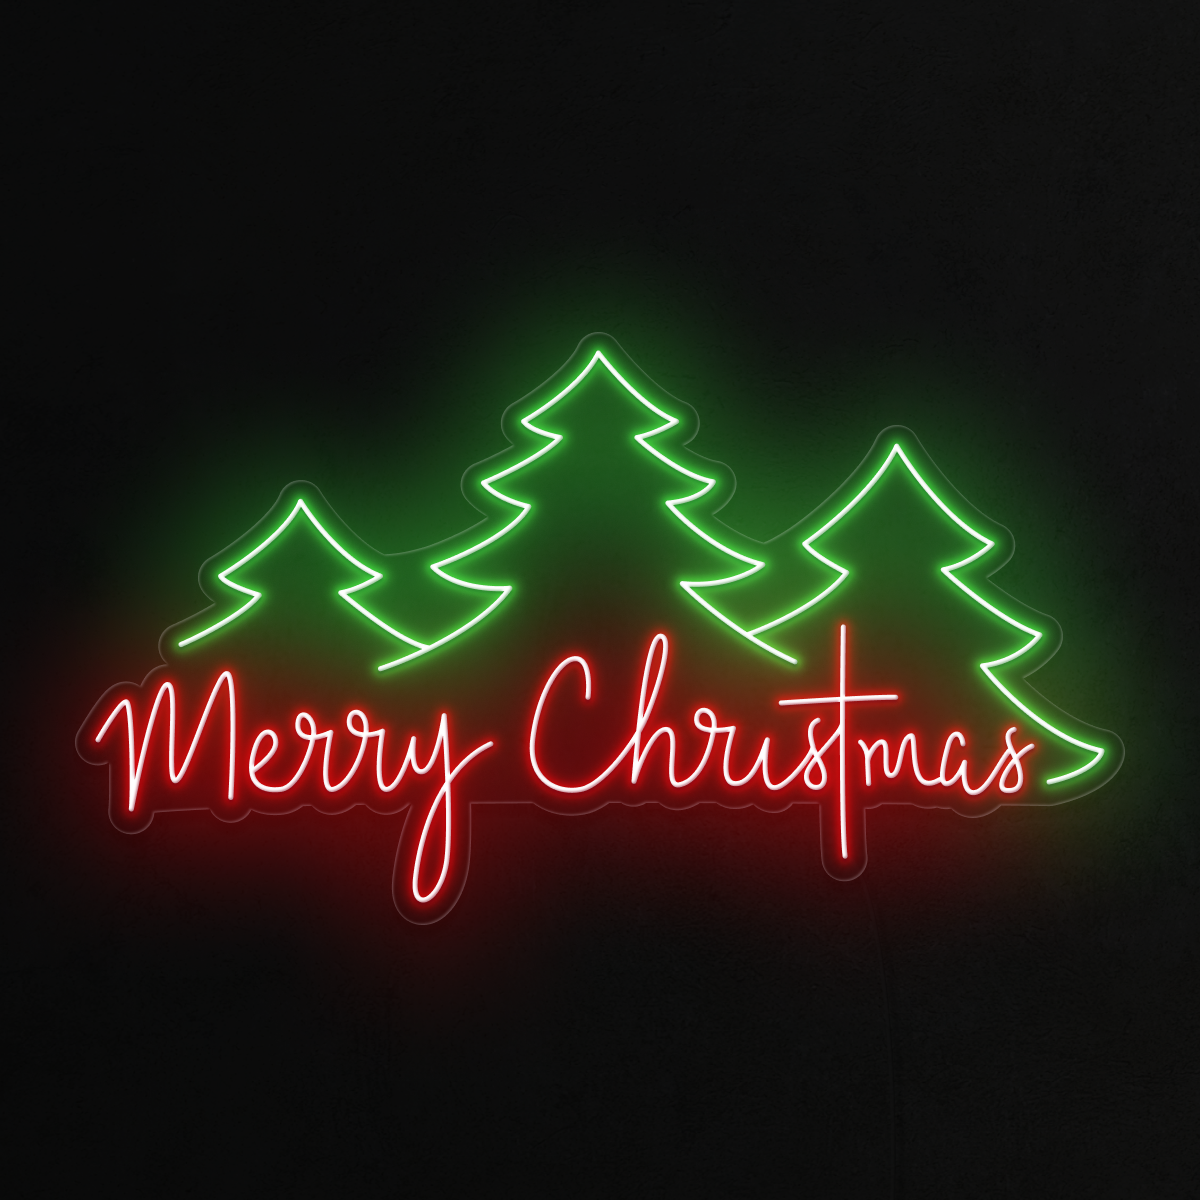 Christmas Wishes & Tree  Neon Sign